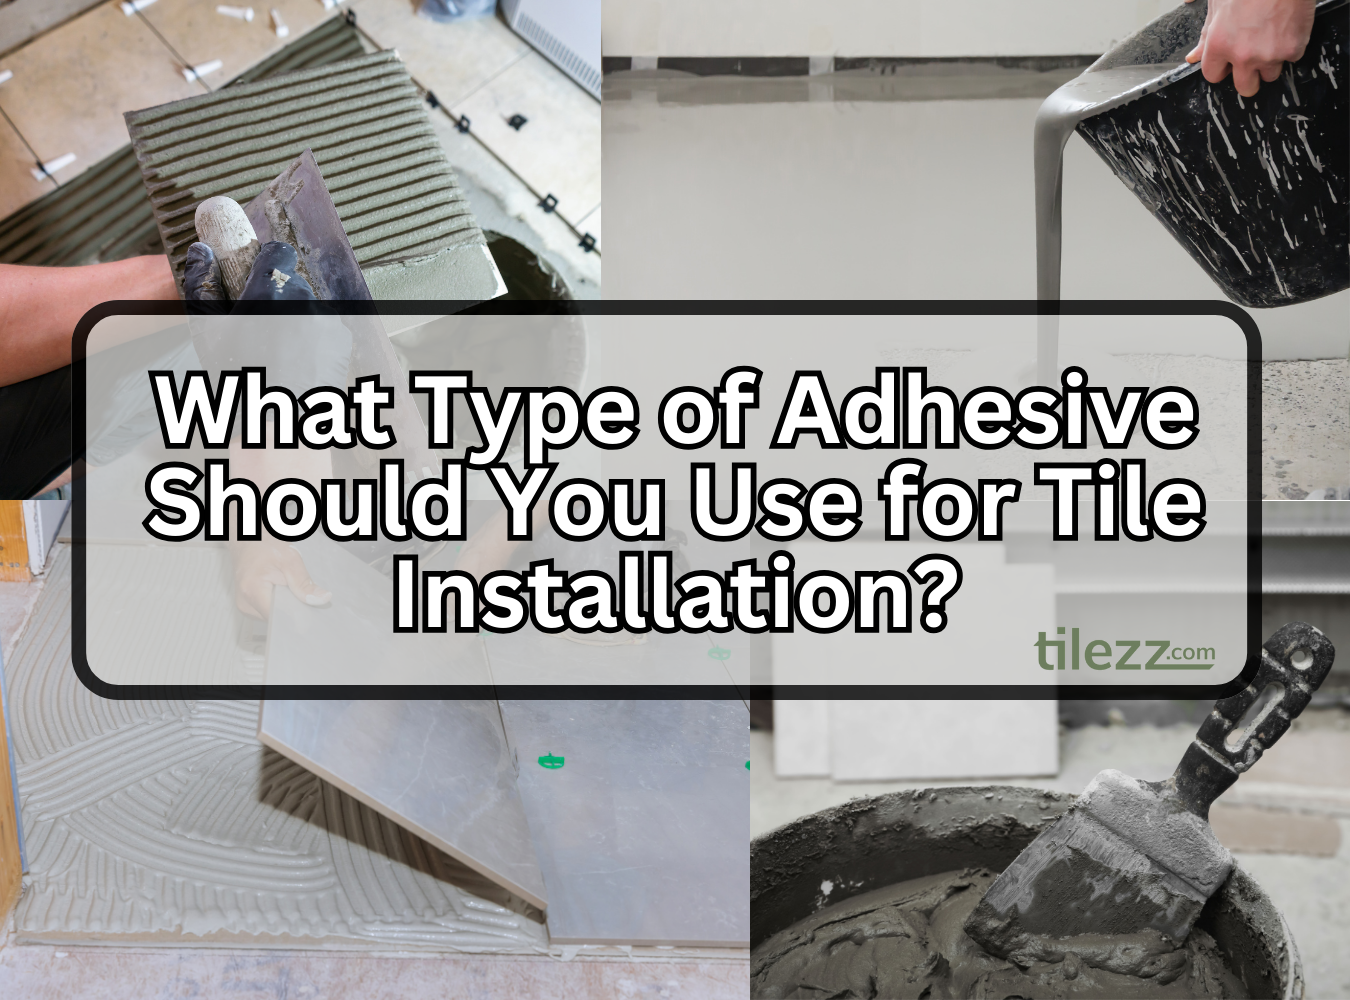 What Type of Adhesive Should You Use for Tile Installation?